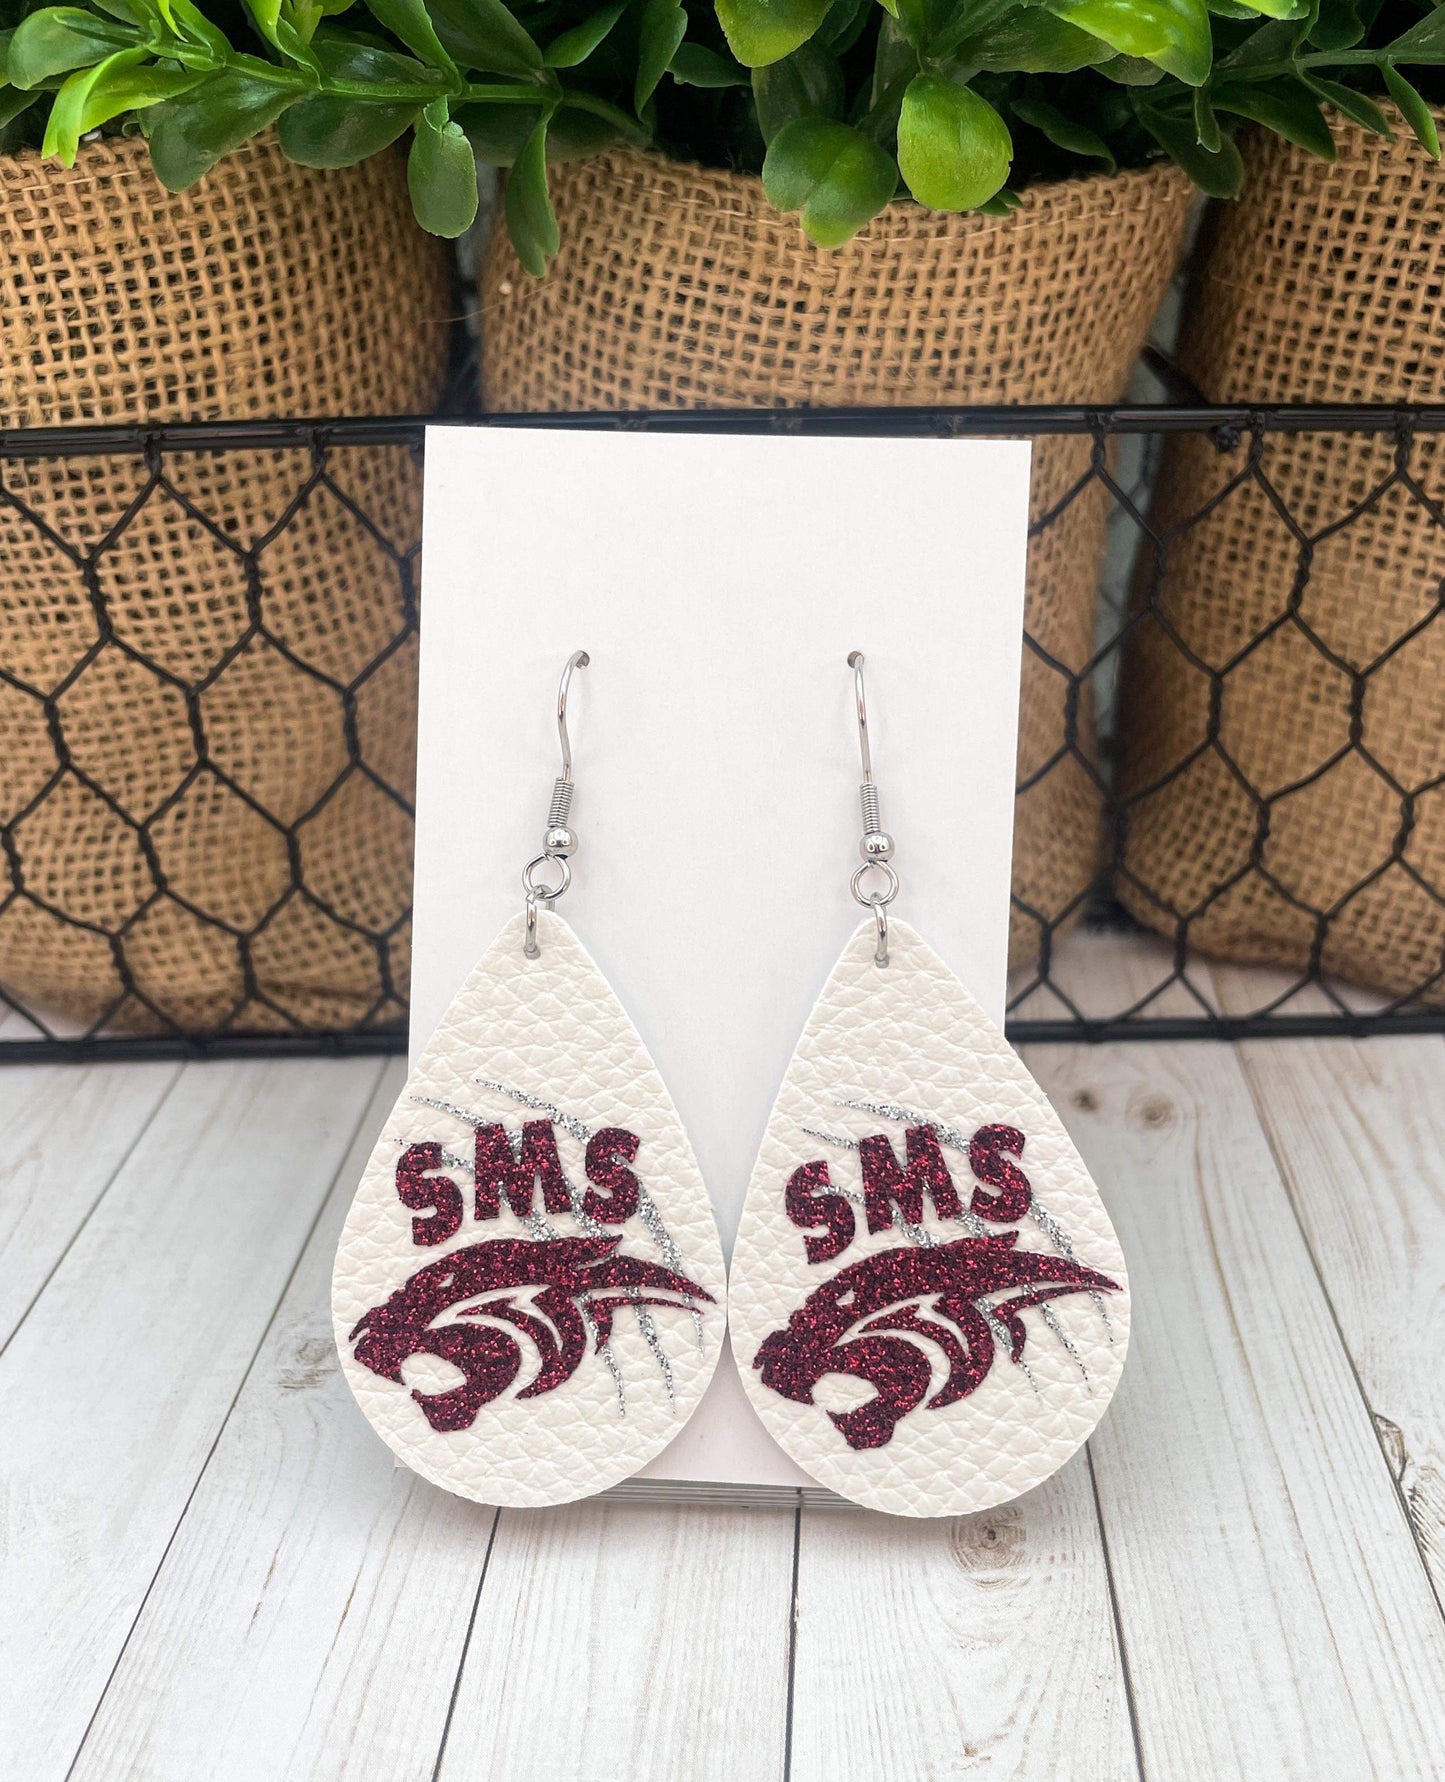 Smyrna Panthers Earrings